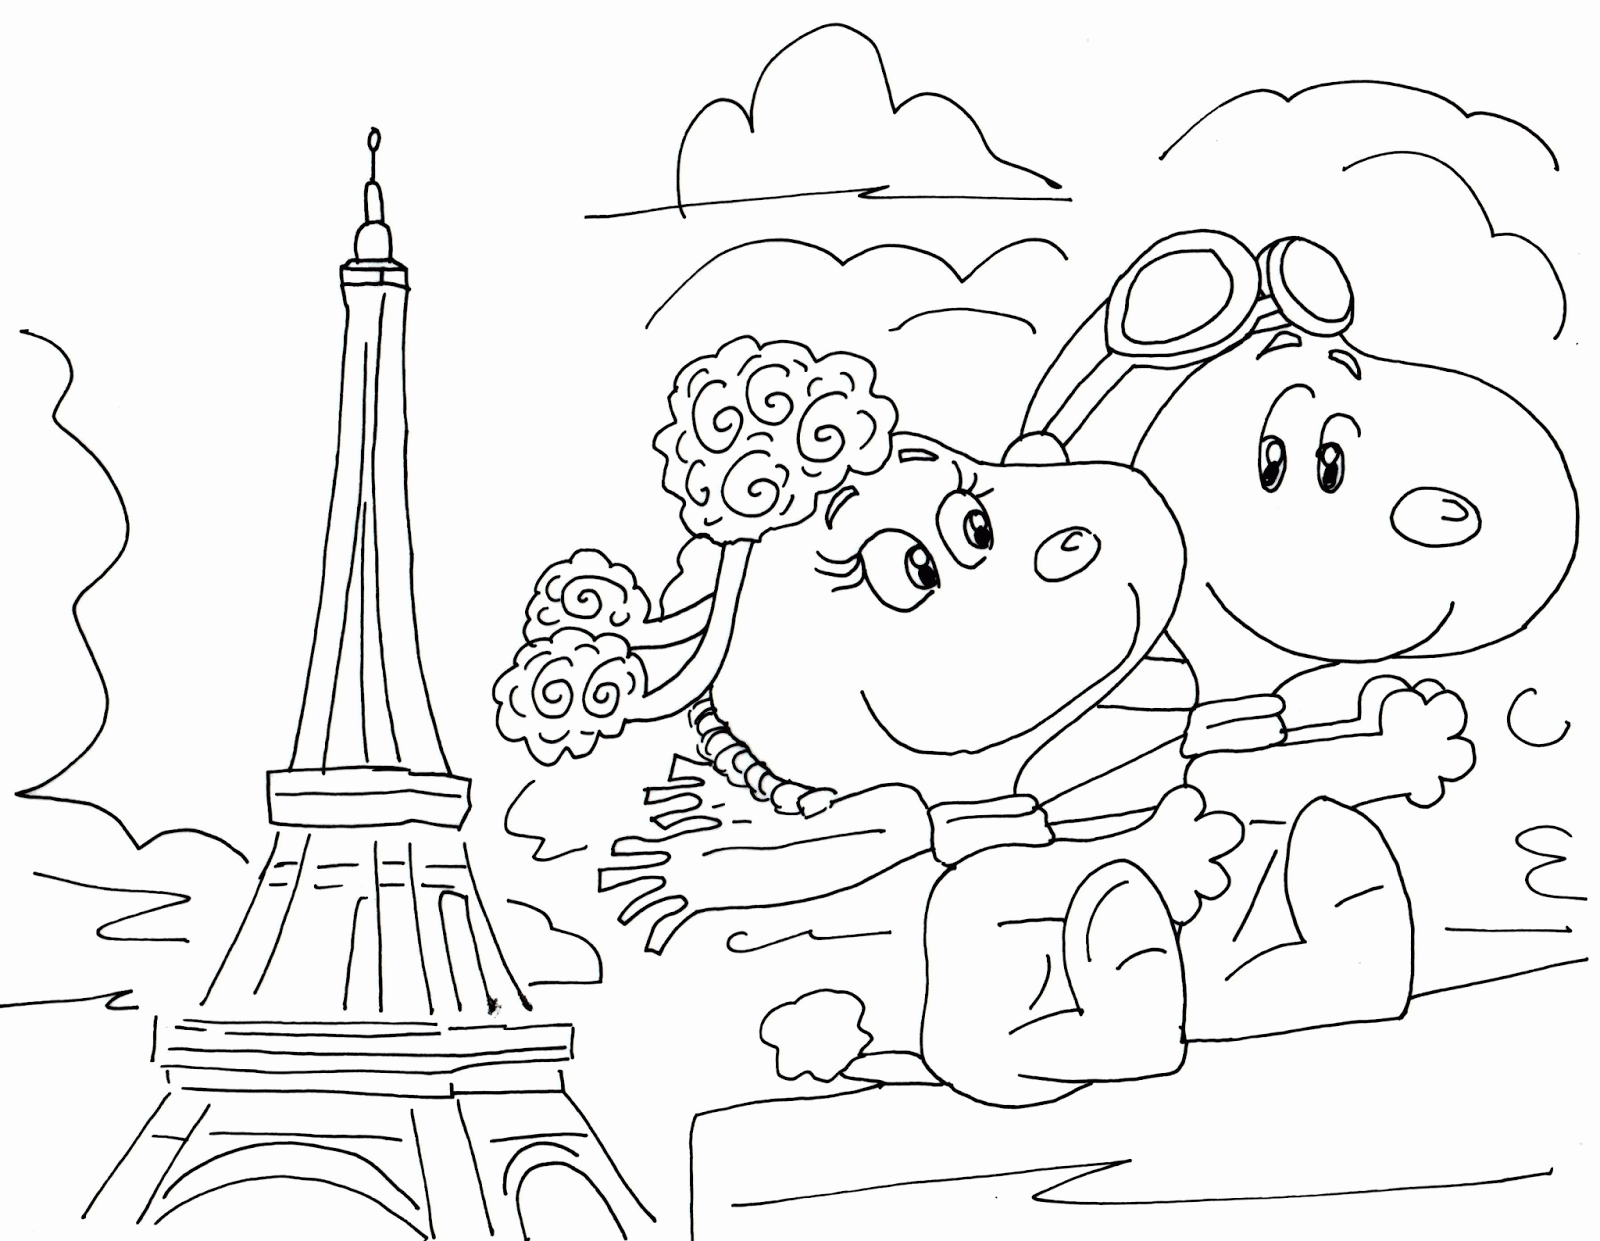 Free Charlie Brown Snoopy and Peanuts Coloring Pages: Fifi and ...